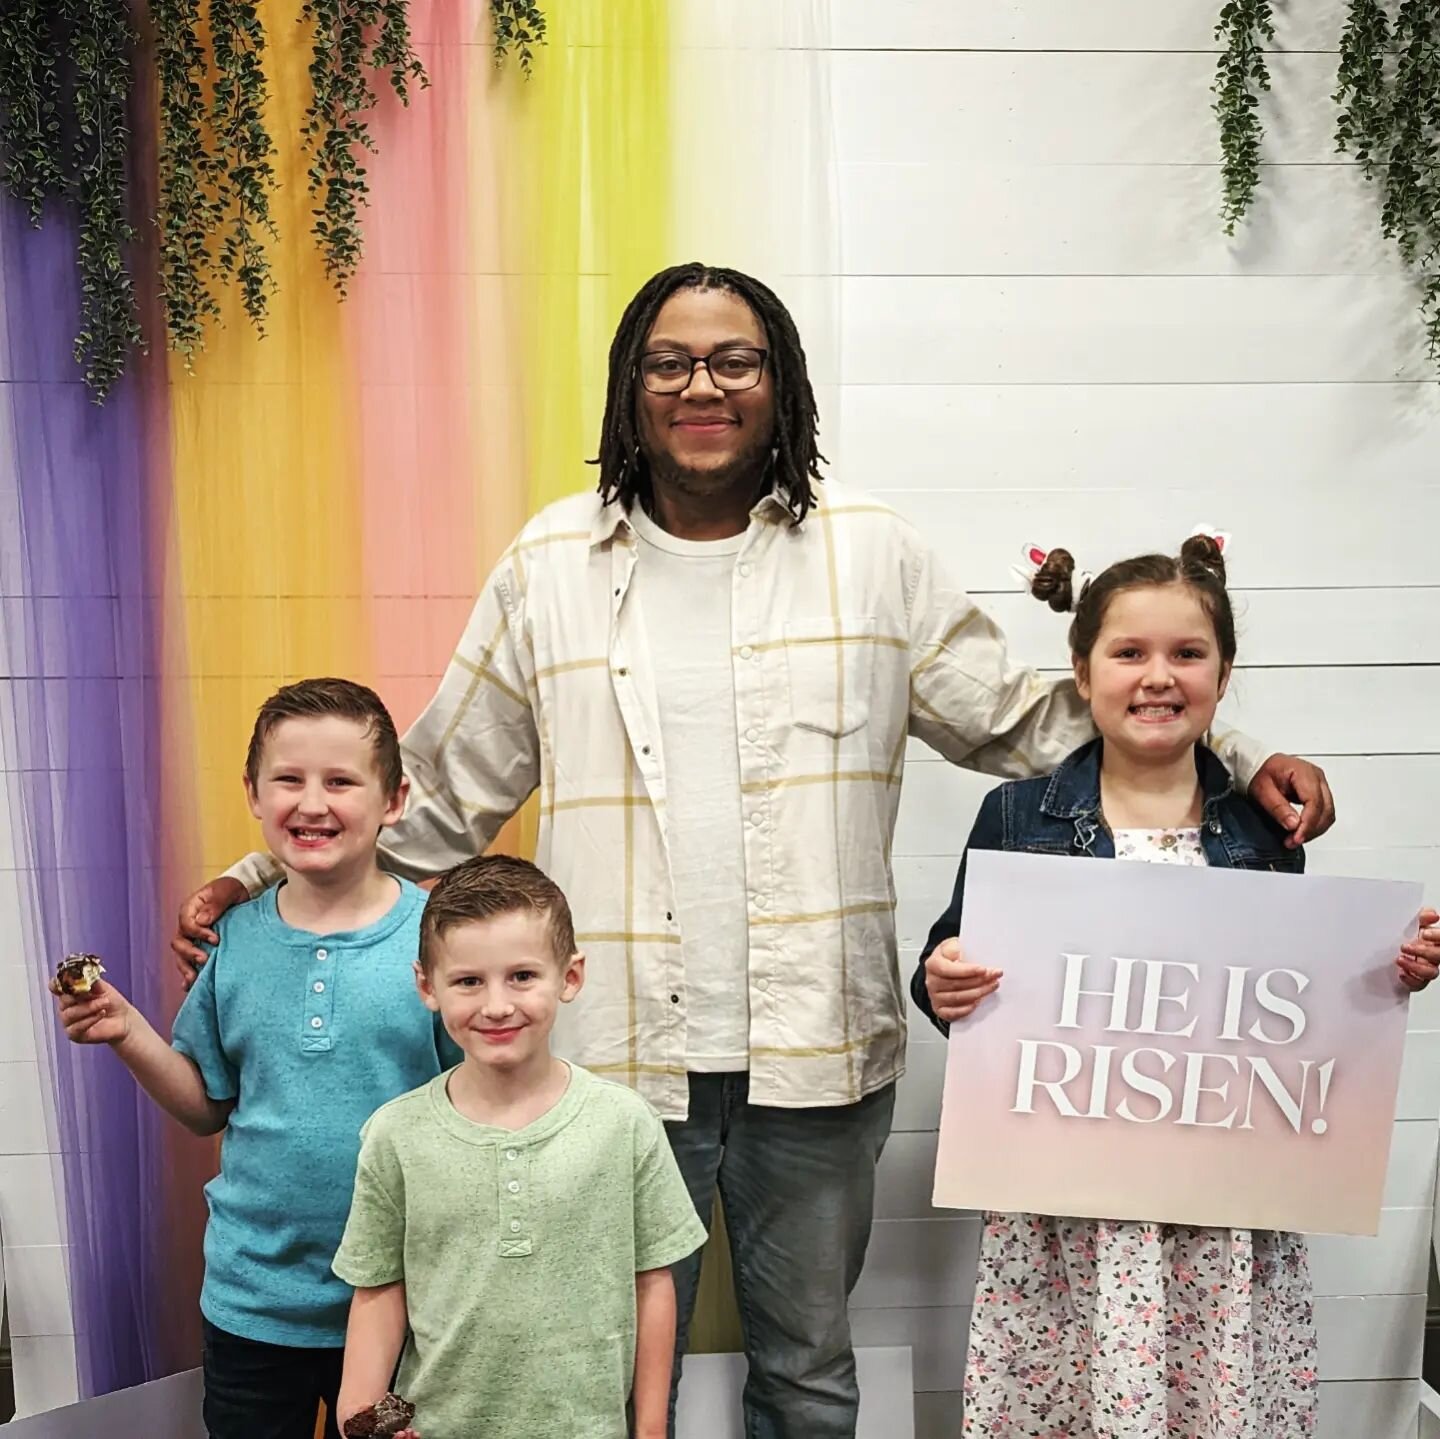 Second Easter Photo Dump 💜💙 

‭Romans 11:36 
For from him and through him and to him are all things. To him be the glory forever. Amen.


We love you church fam!